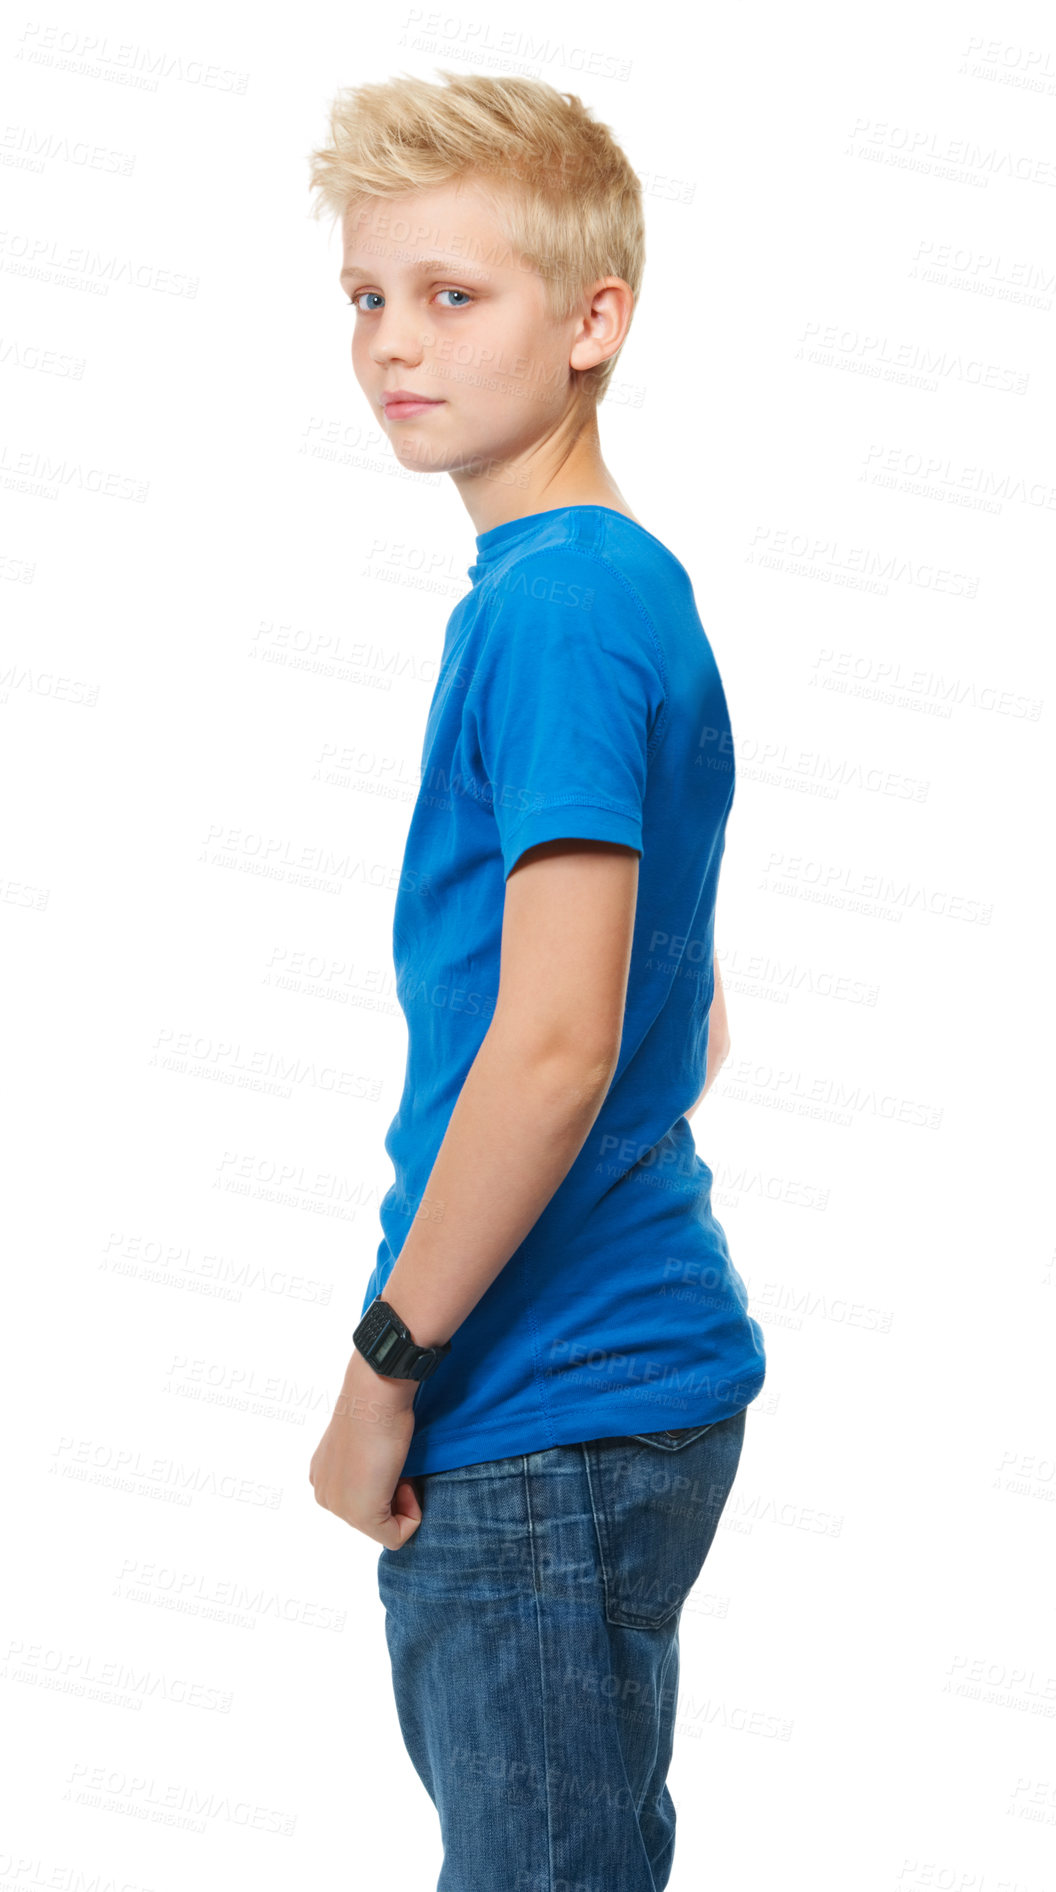 Buy stock photo Cropped studio portrait of a blond teenage boy against a white background